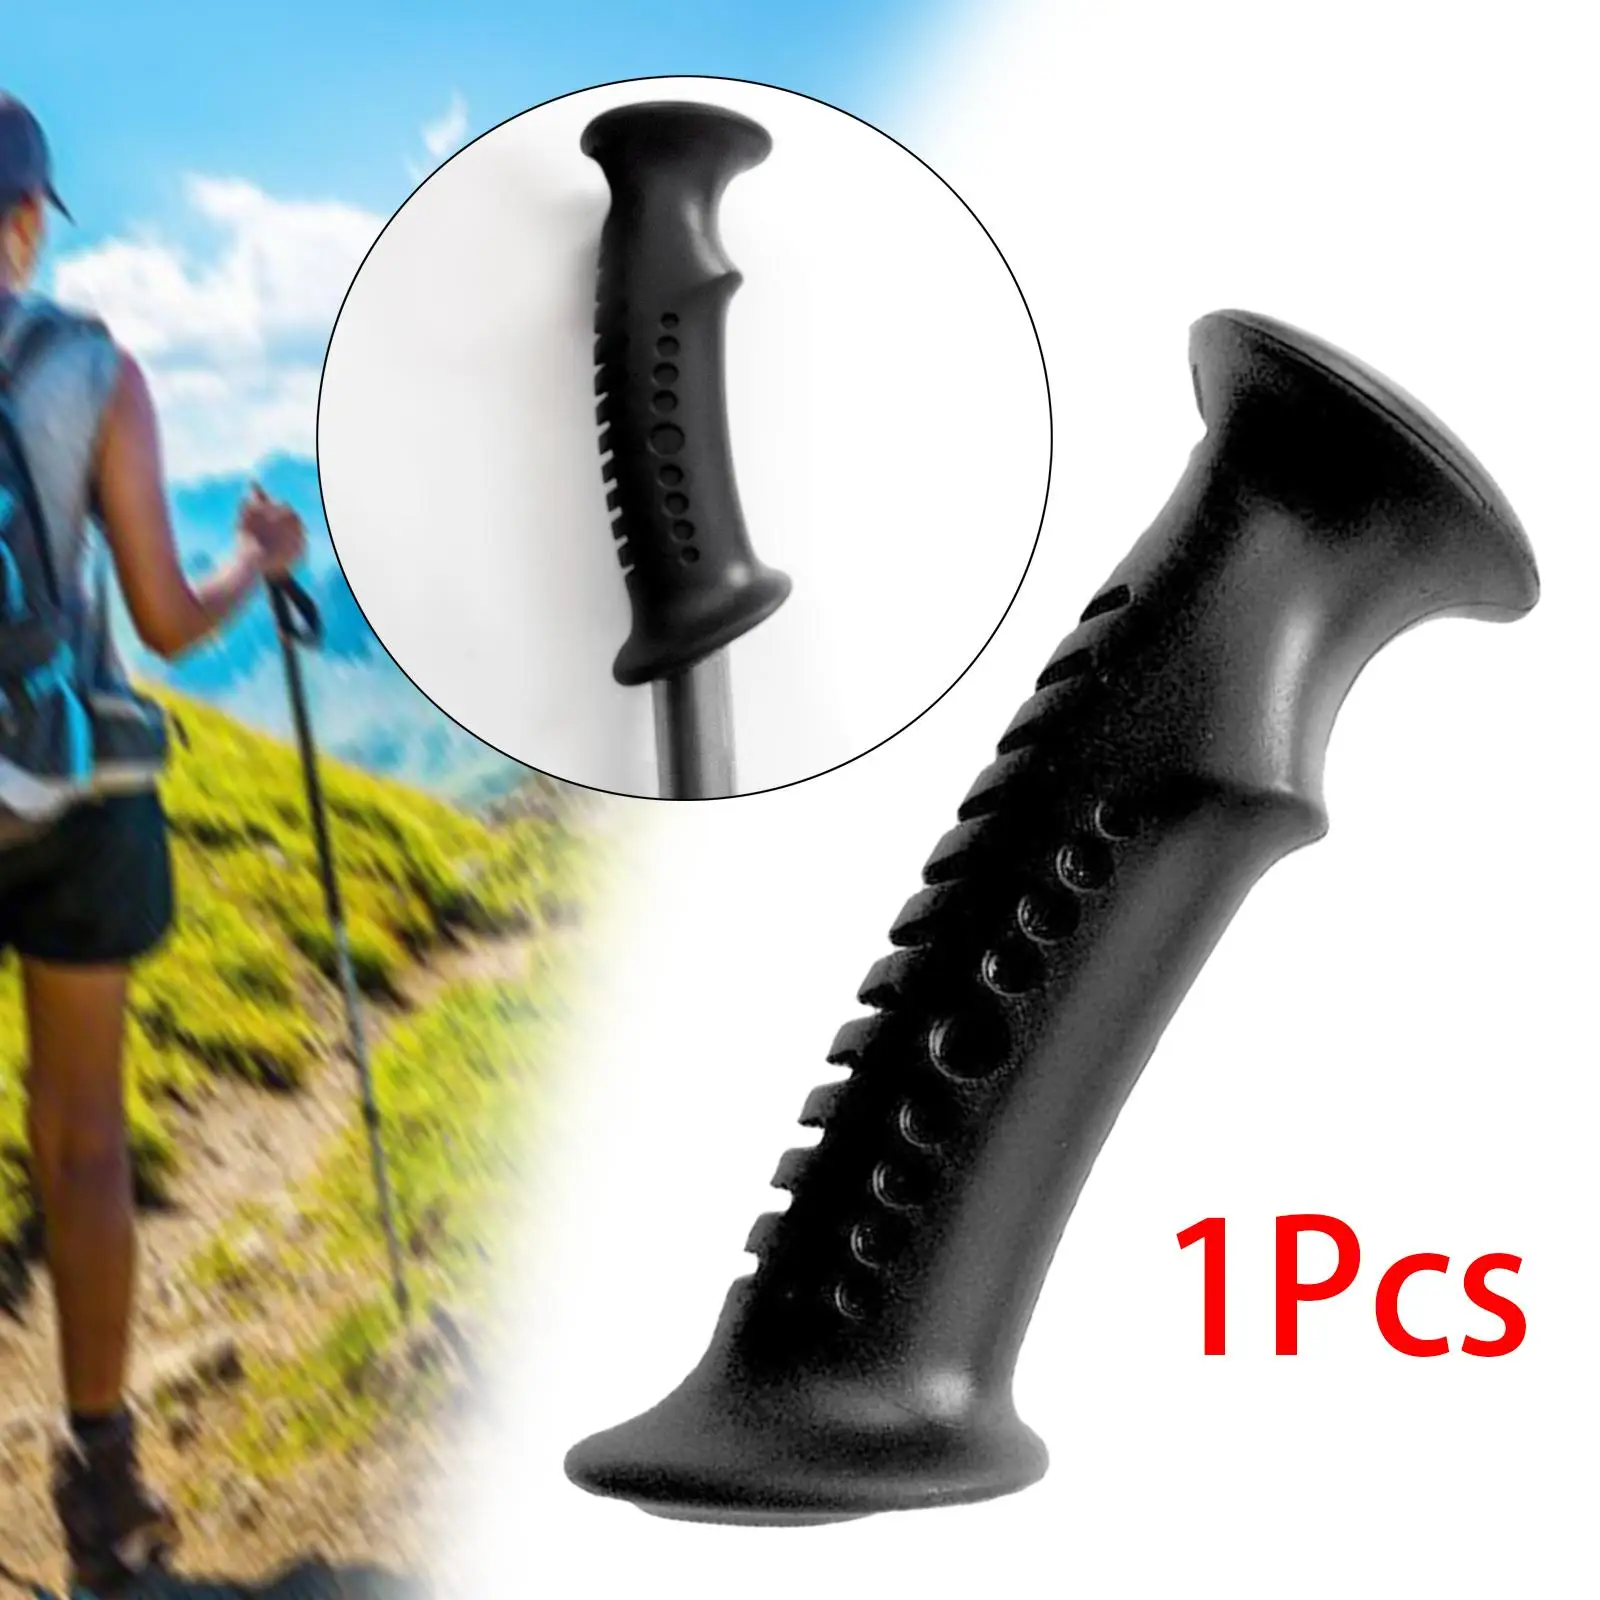 Trekking Pole Handle Monopod Head Attachment Converter Grip for Outdoor Photography Outside Seniors Walking Cane Walking Staff